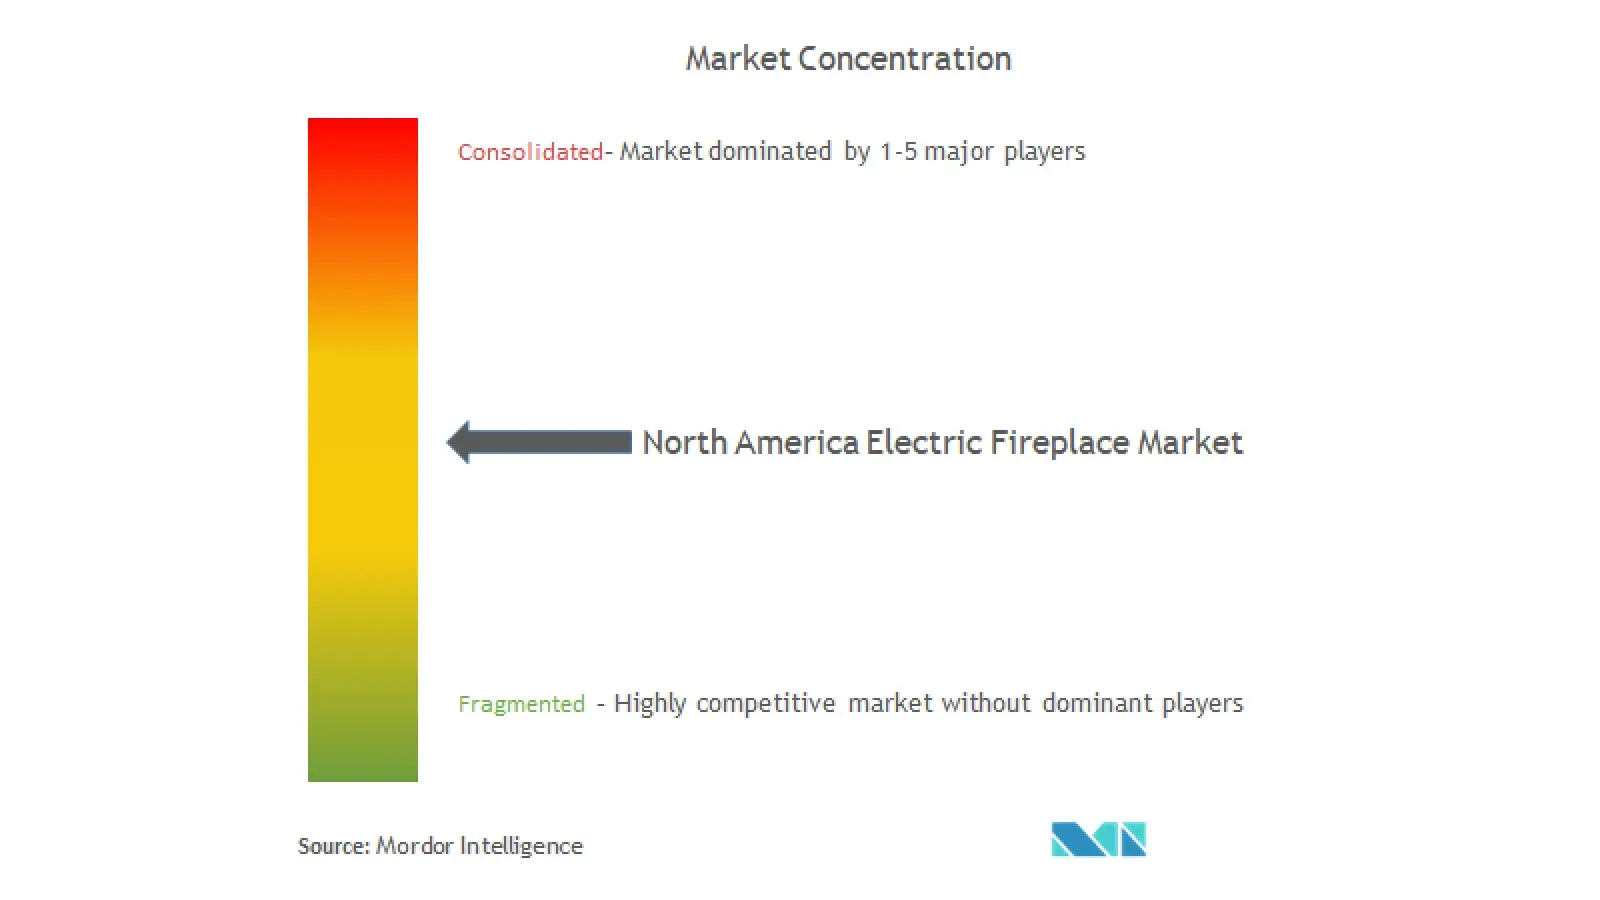 North America Electric Fireplace Market Concentration